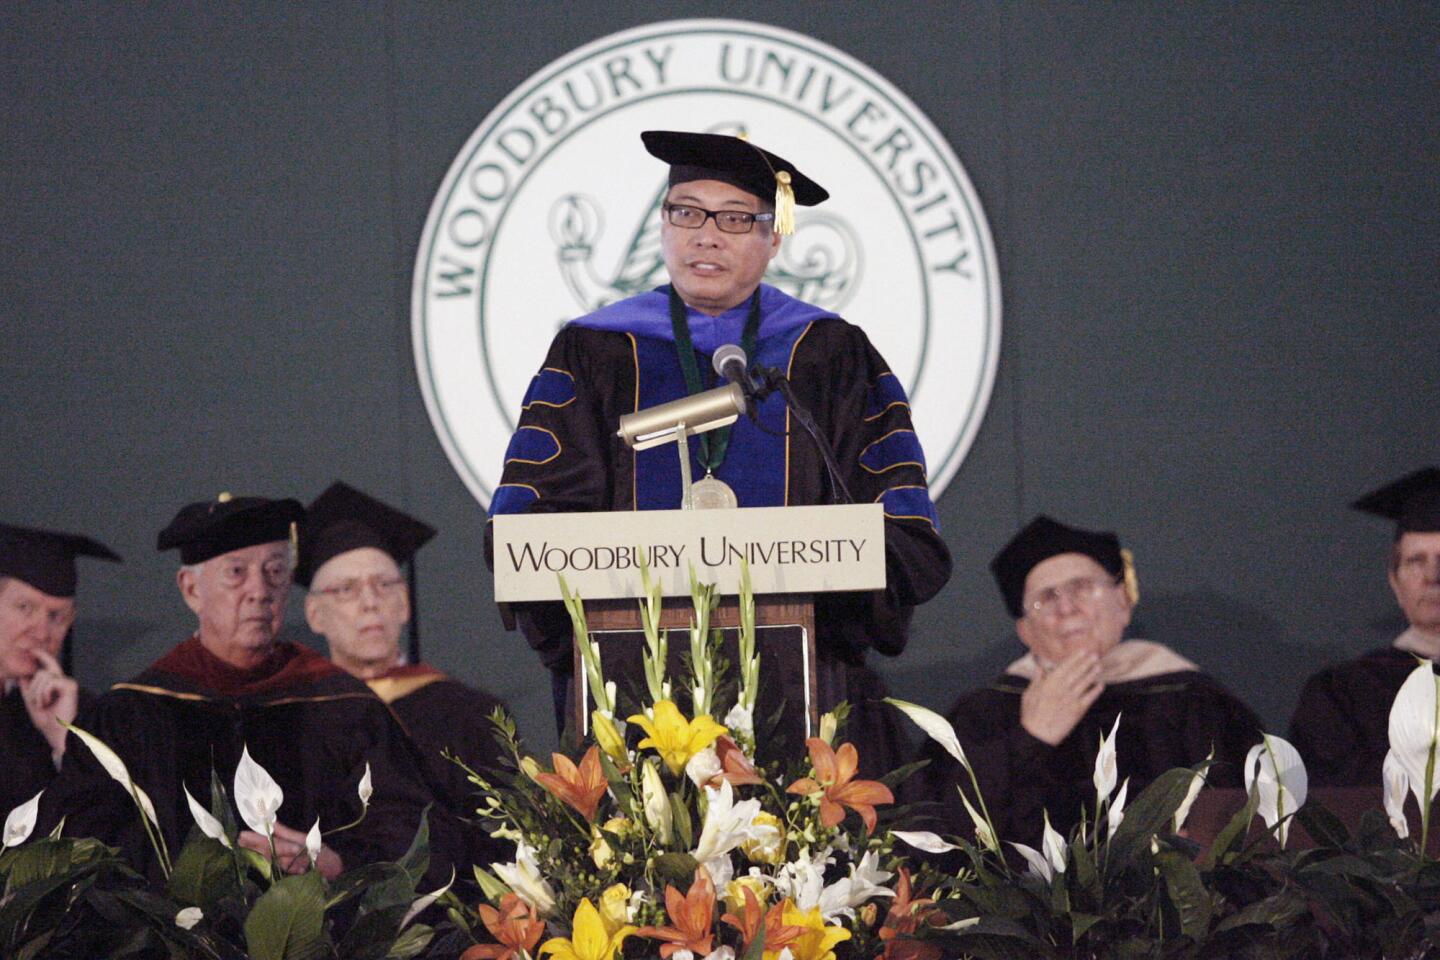 Woodbury University's inauguration and installation of 13th president